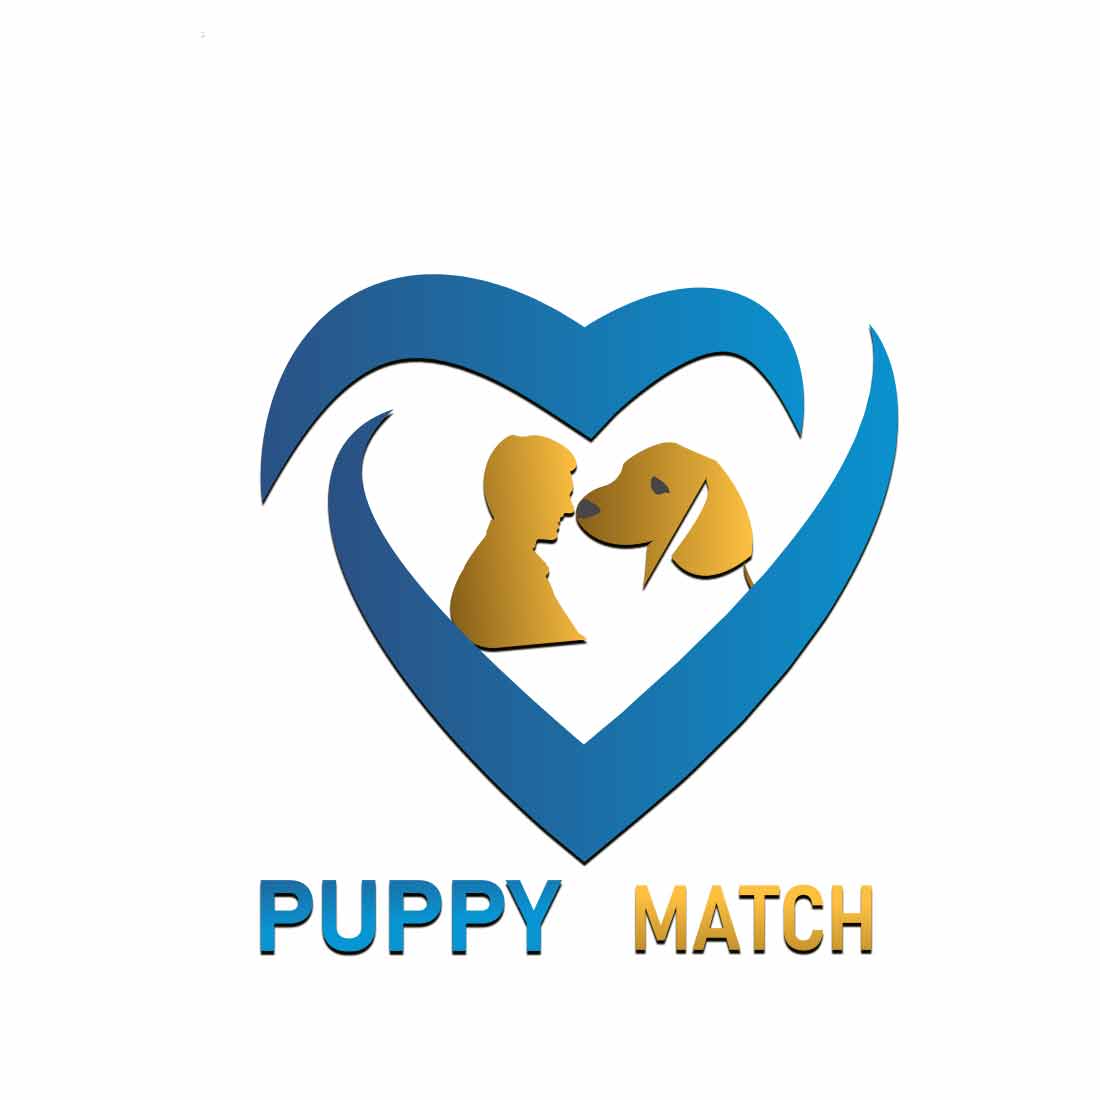 PUPPY MATCH,$7 preview image.